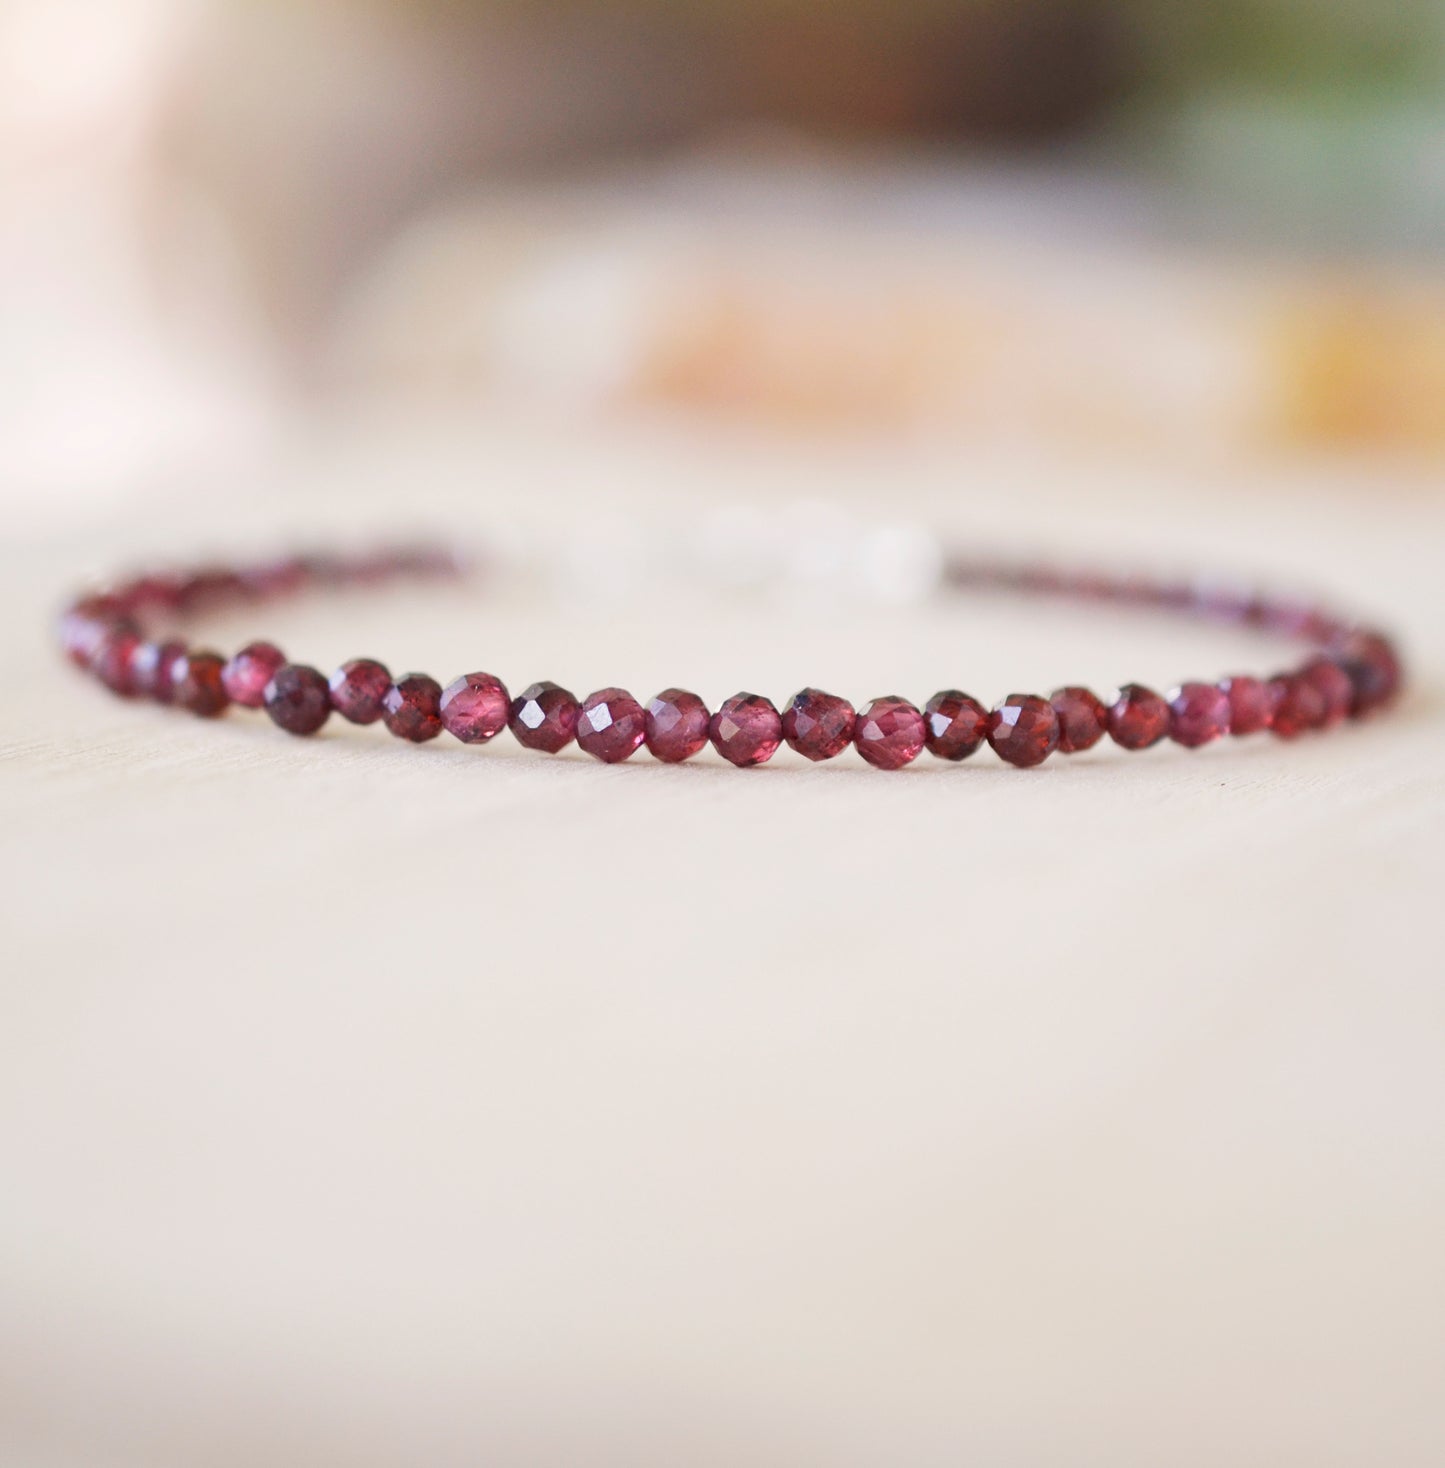 Handmade red Garnet bracelet with small round stones. Sterling Silver or 14k Gold Filled.